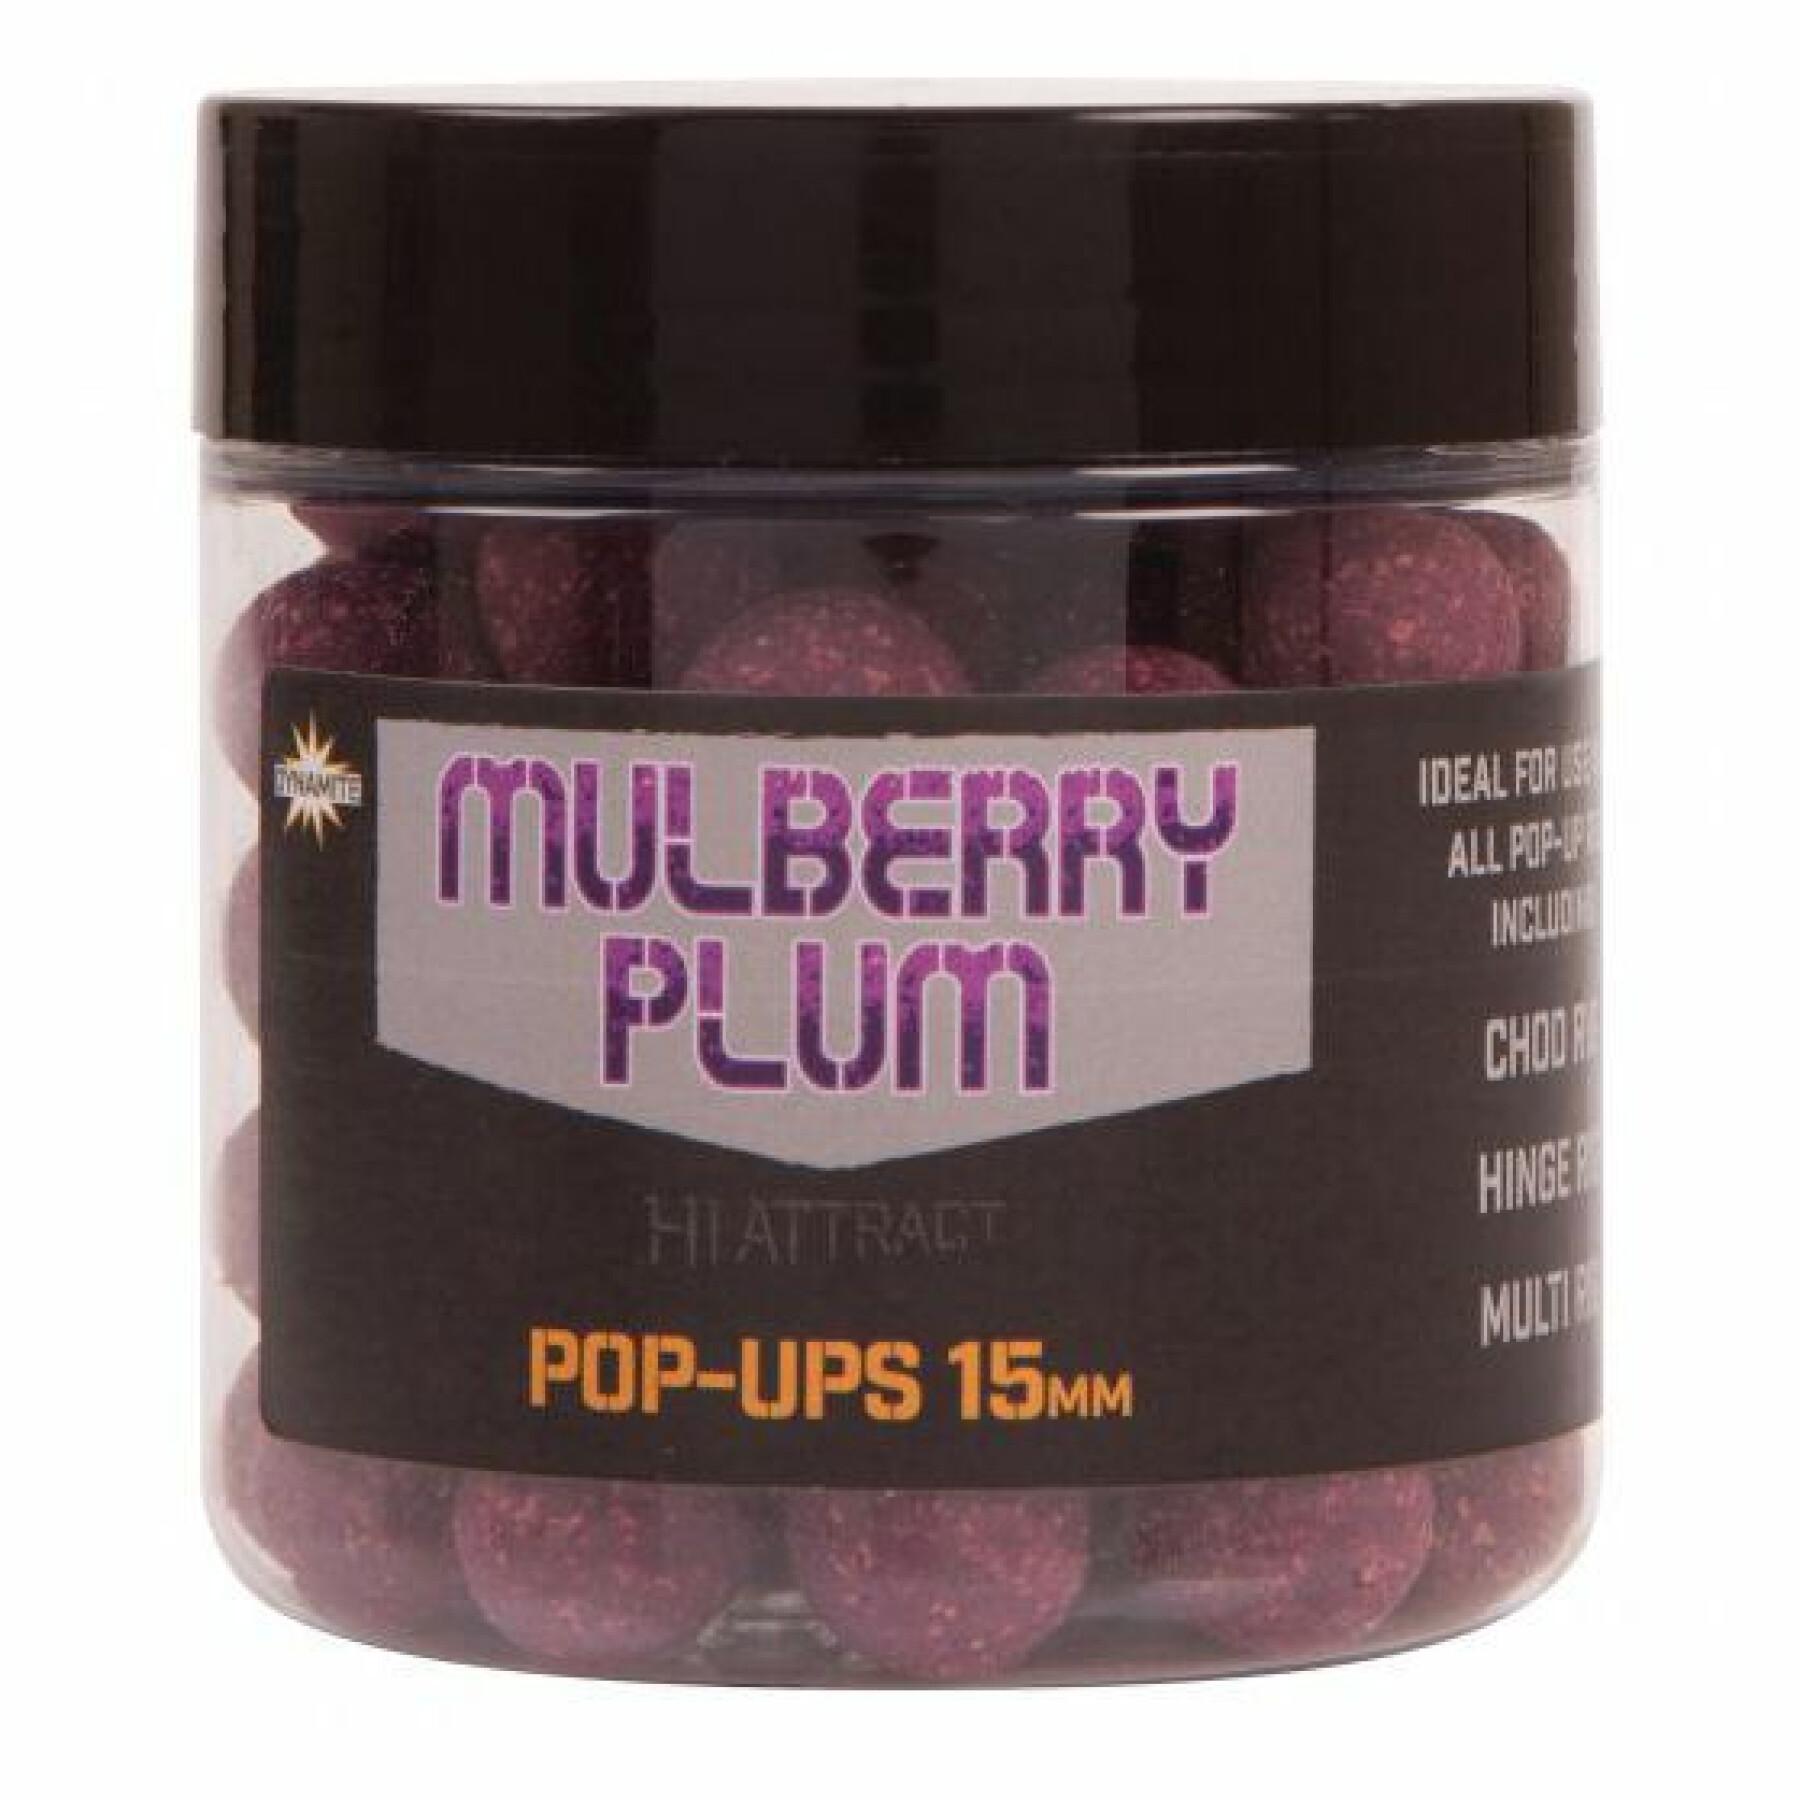 Pop-up-Boilies Dynamite Baits Mulberry plum